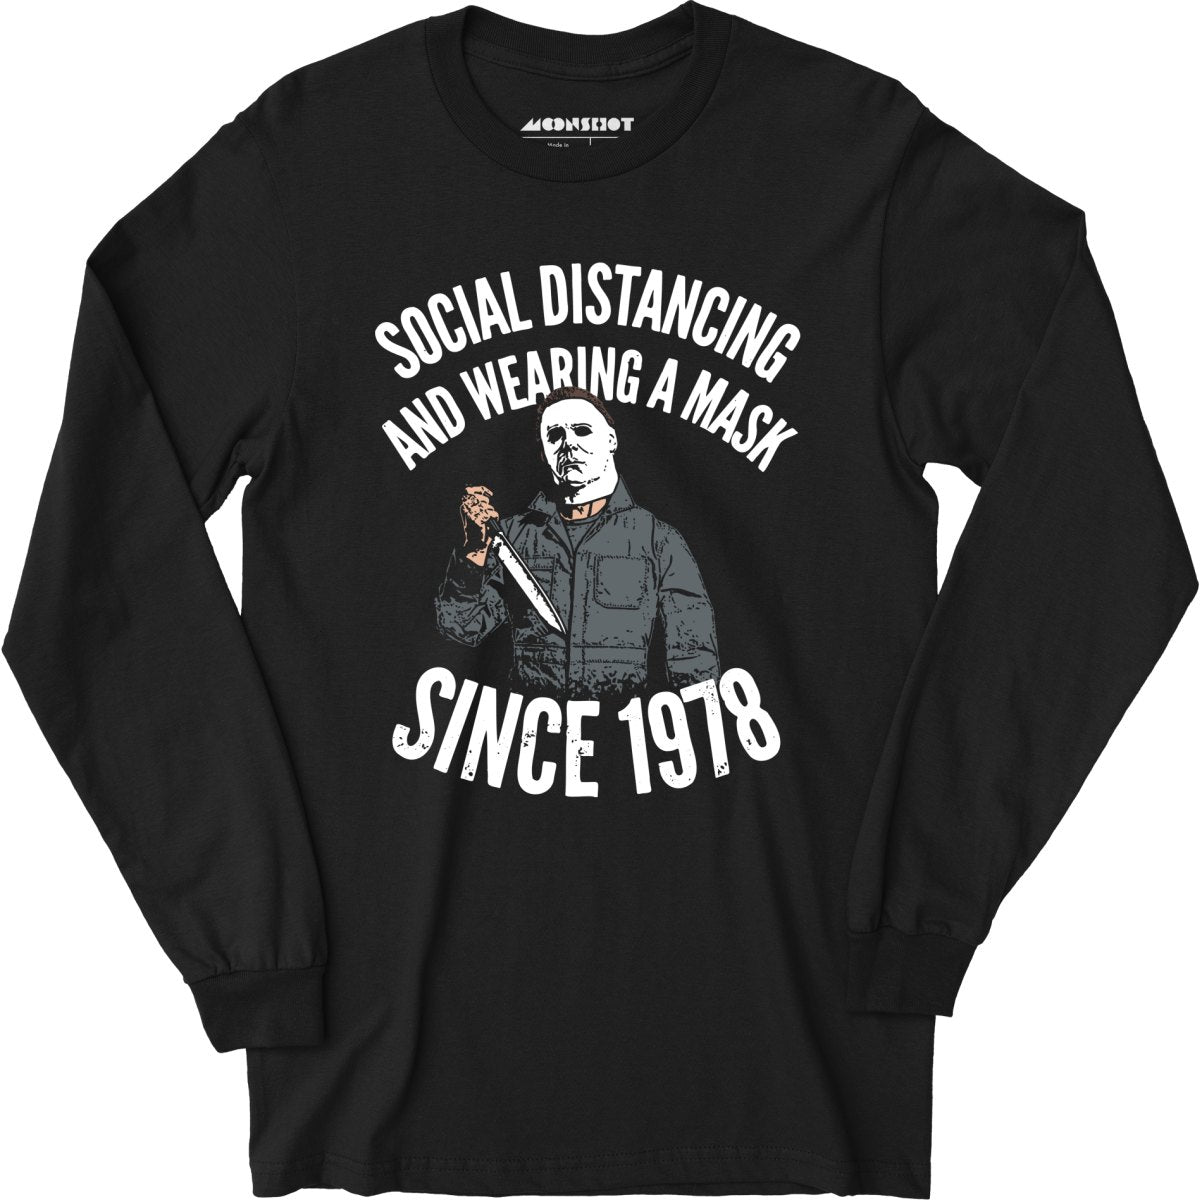 Social Distancing and Wearing a Mask Since 1978 - Long Sleeve T-Shirt